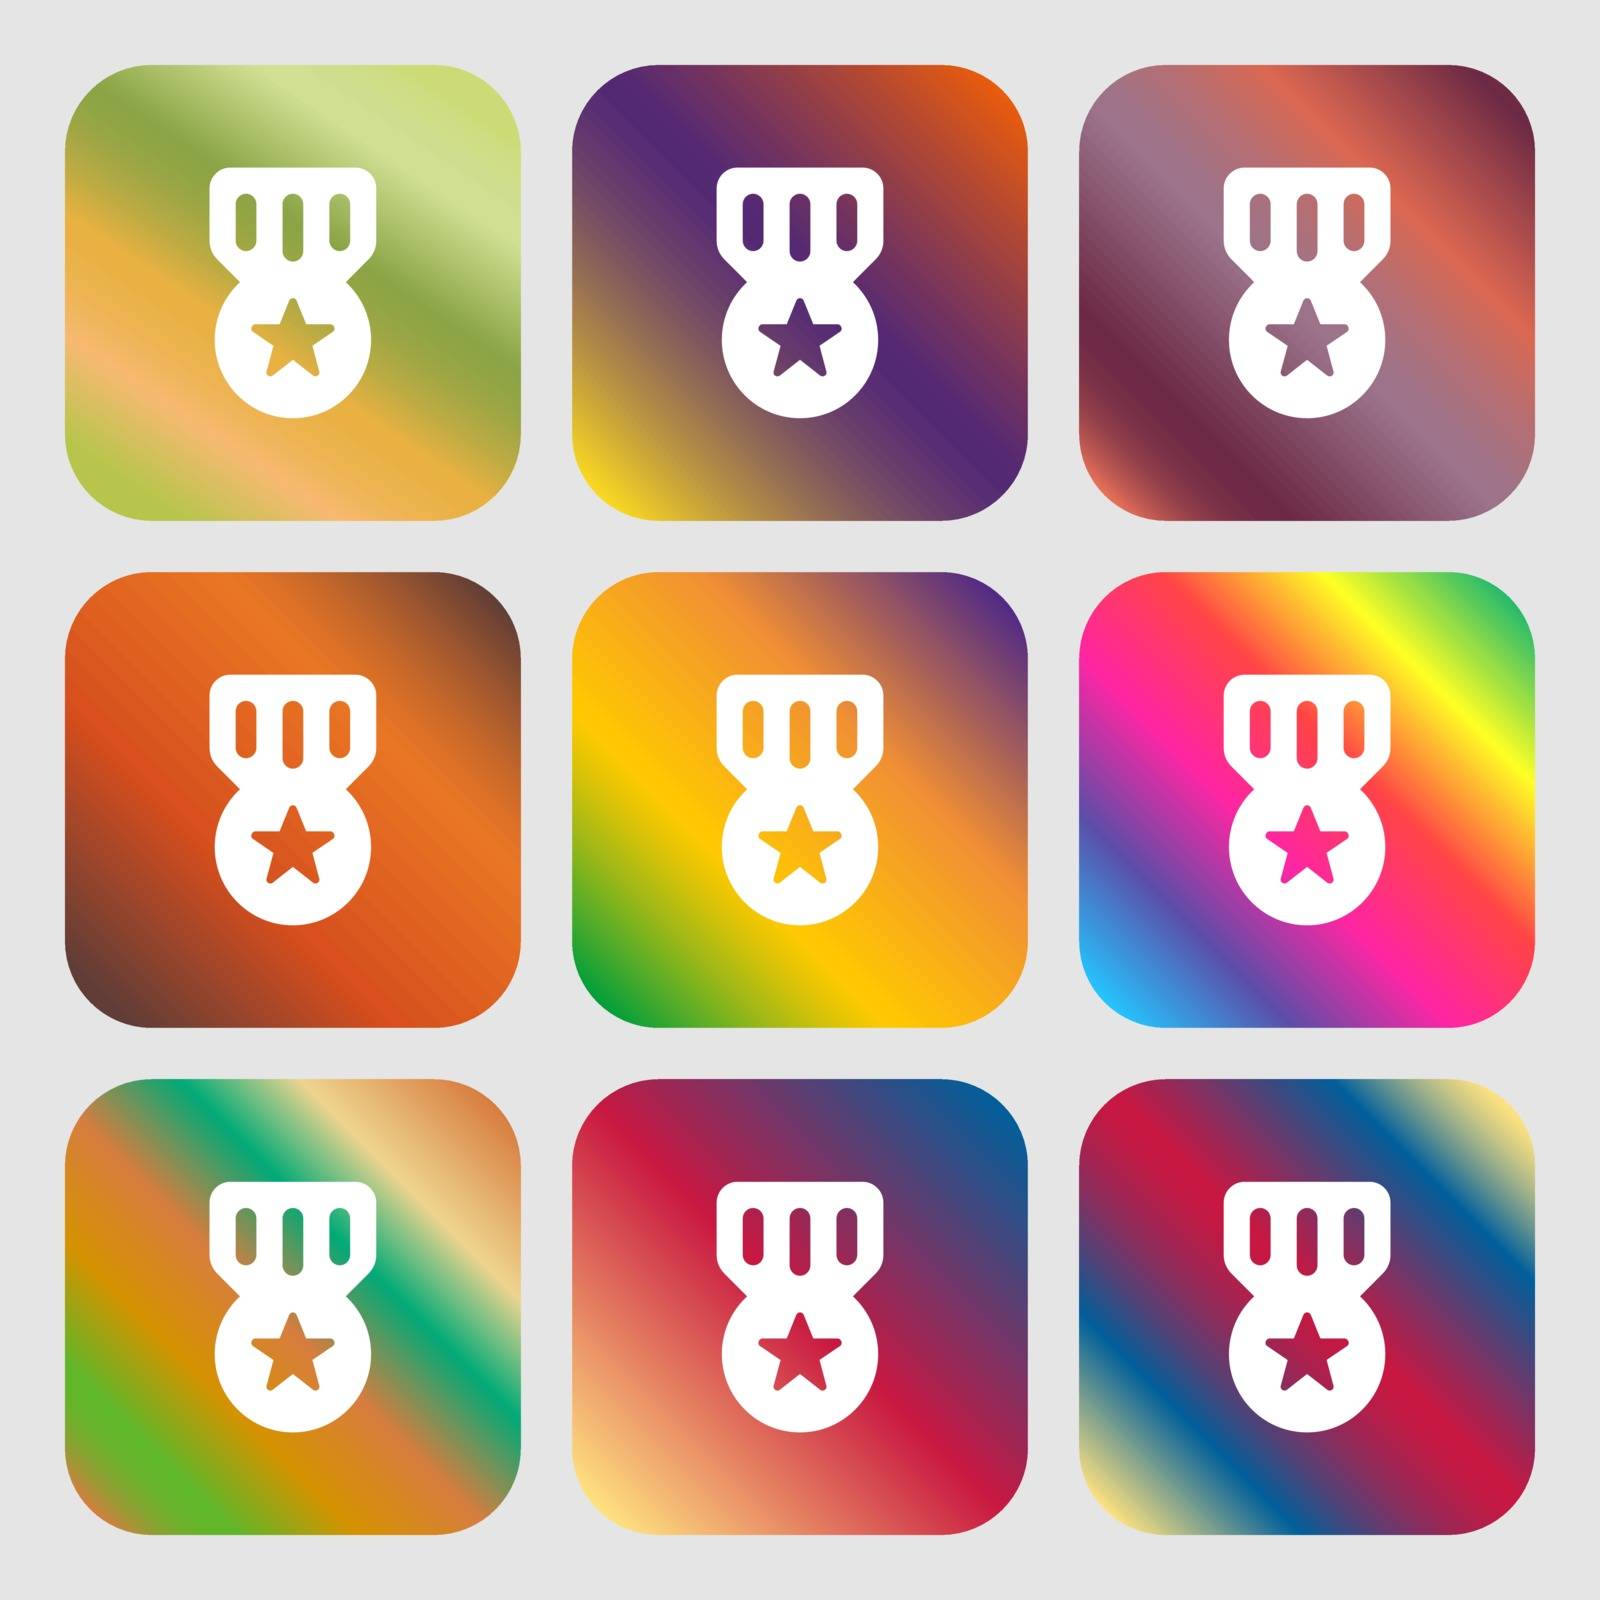 Award, Medal of Honor icon. Nine buttons with bright gradients for beautiful design. Vector illustration